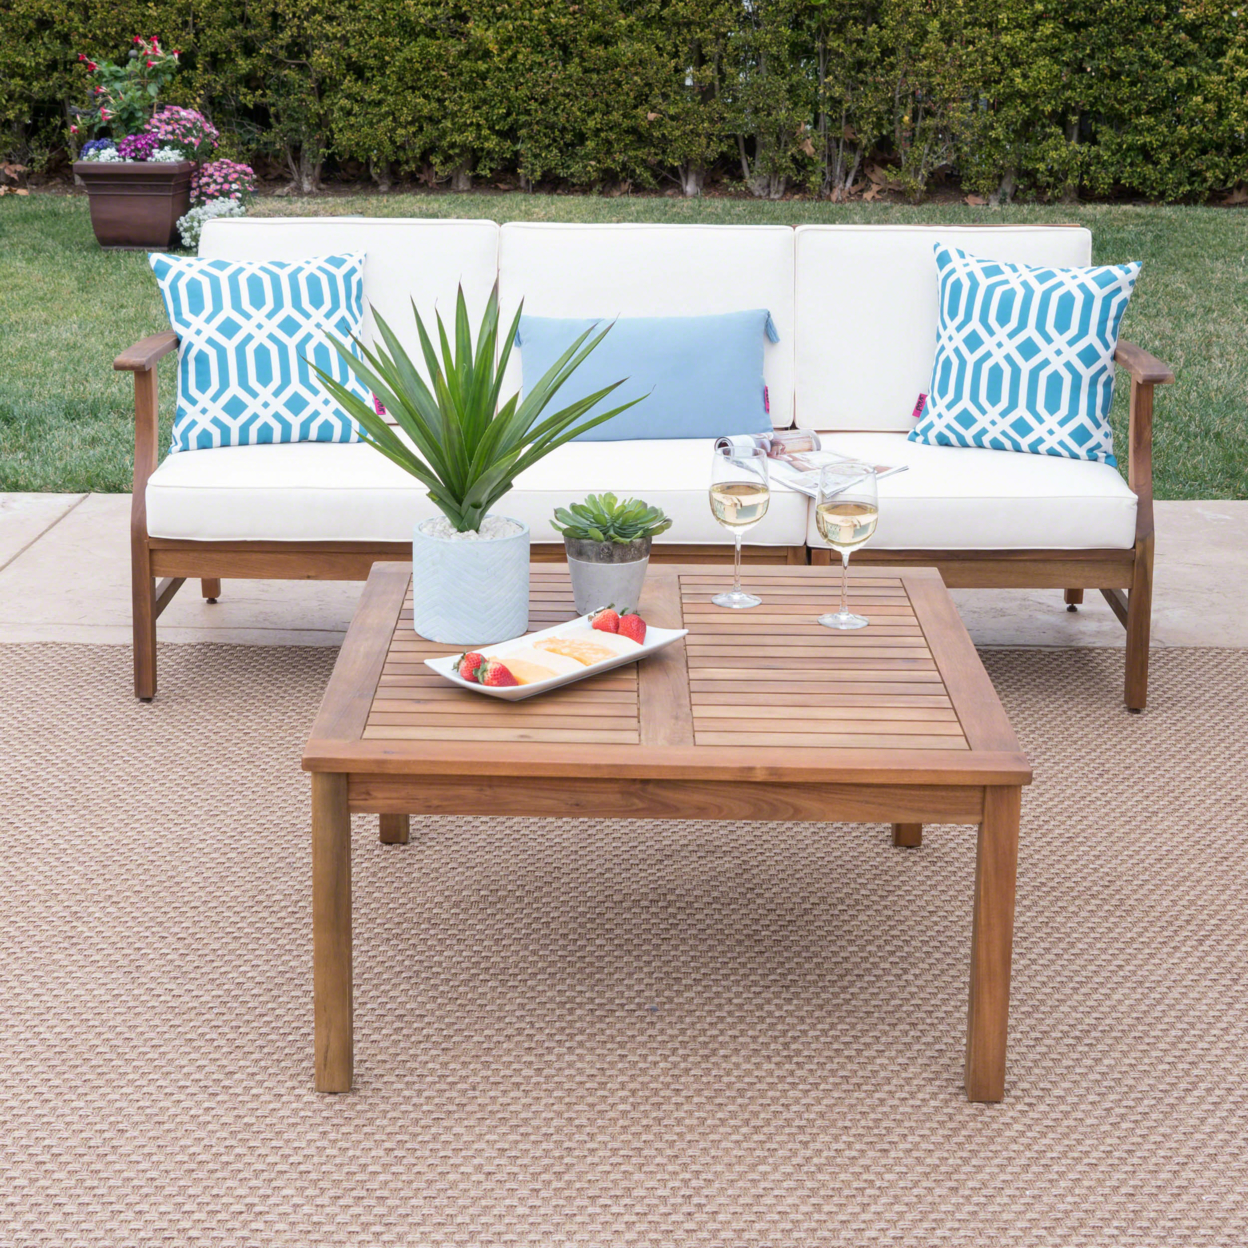 Scarlett Outdoor 3 Seat Teak Finished Acacia Wood Sofa And Table Set - Green